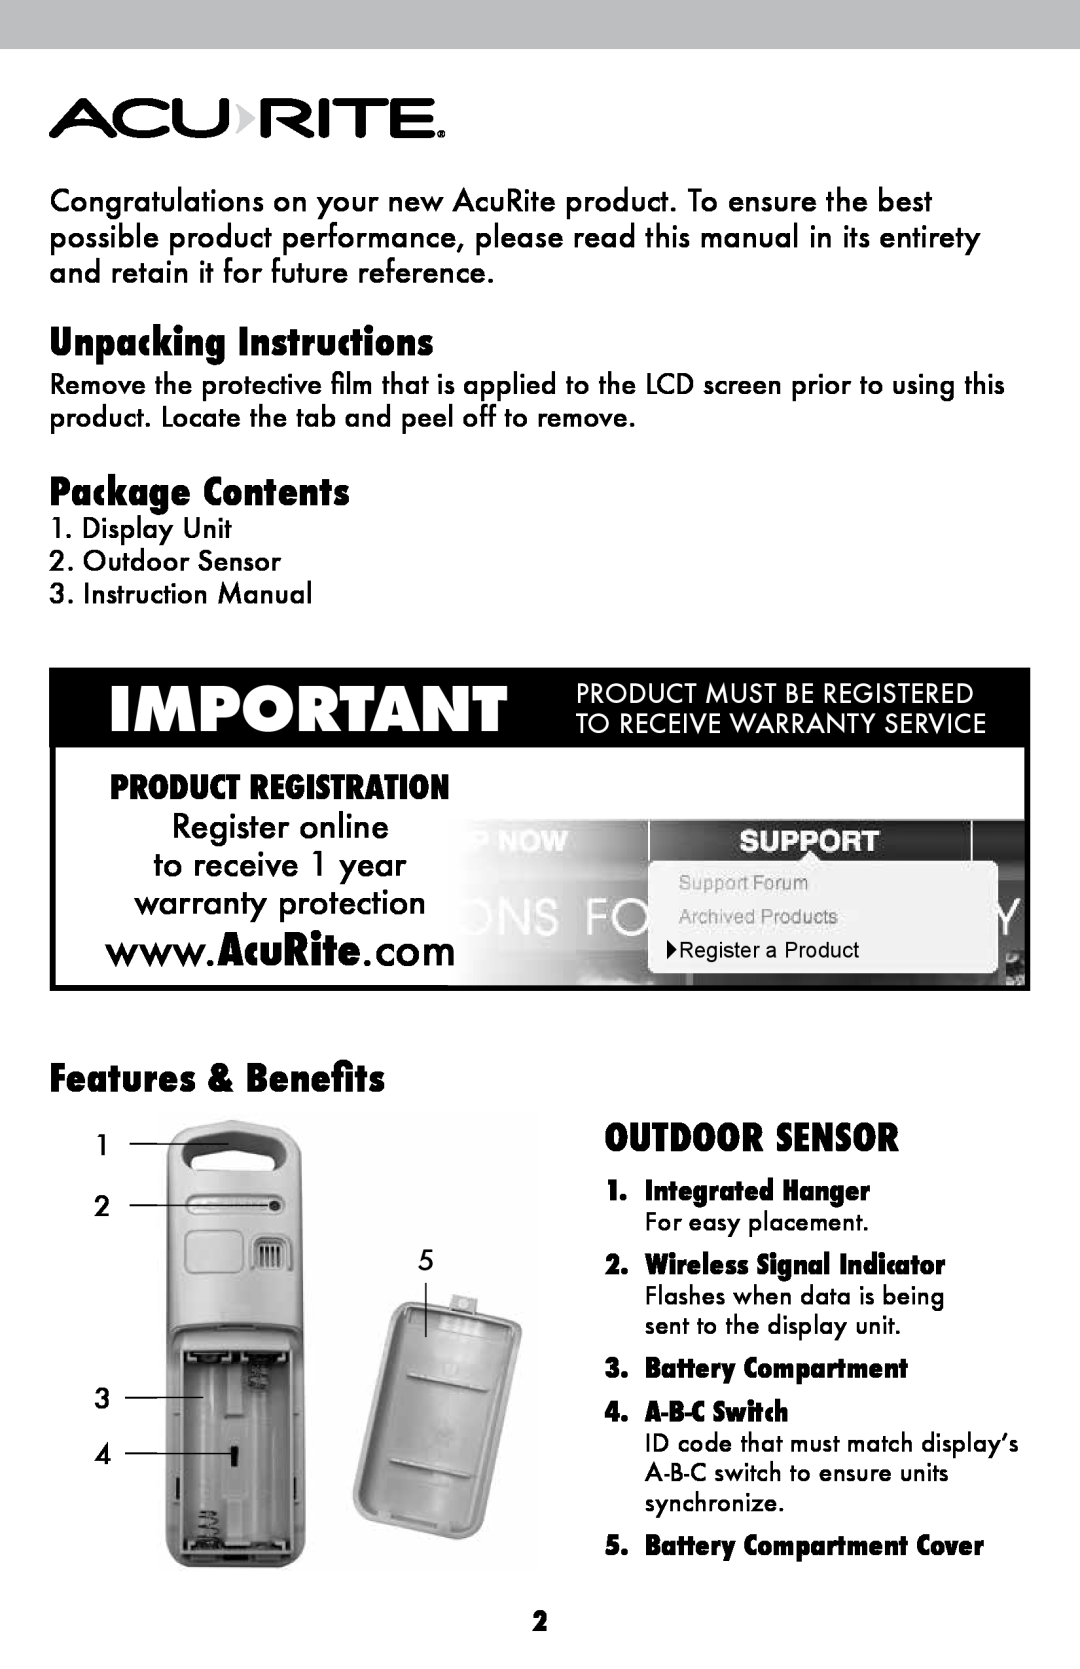 Acu-Rite 02005TBDI Unpacking Instructions, Package Contents, Outdoor Sensor, Features & Benefits, Register online 